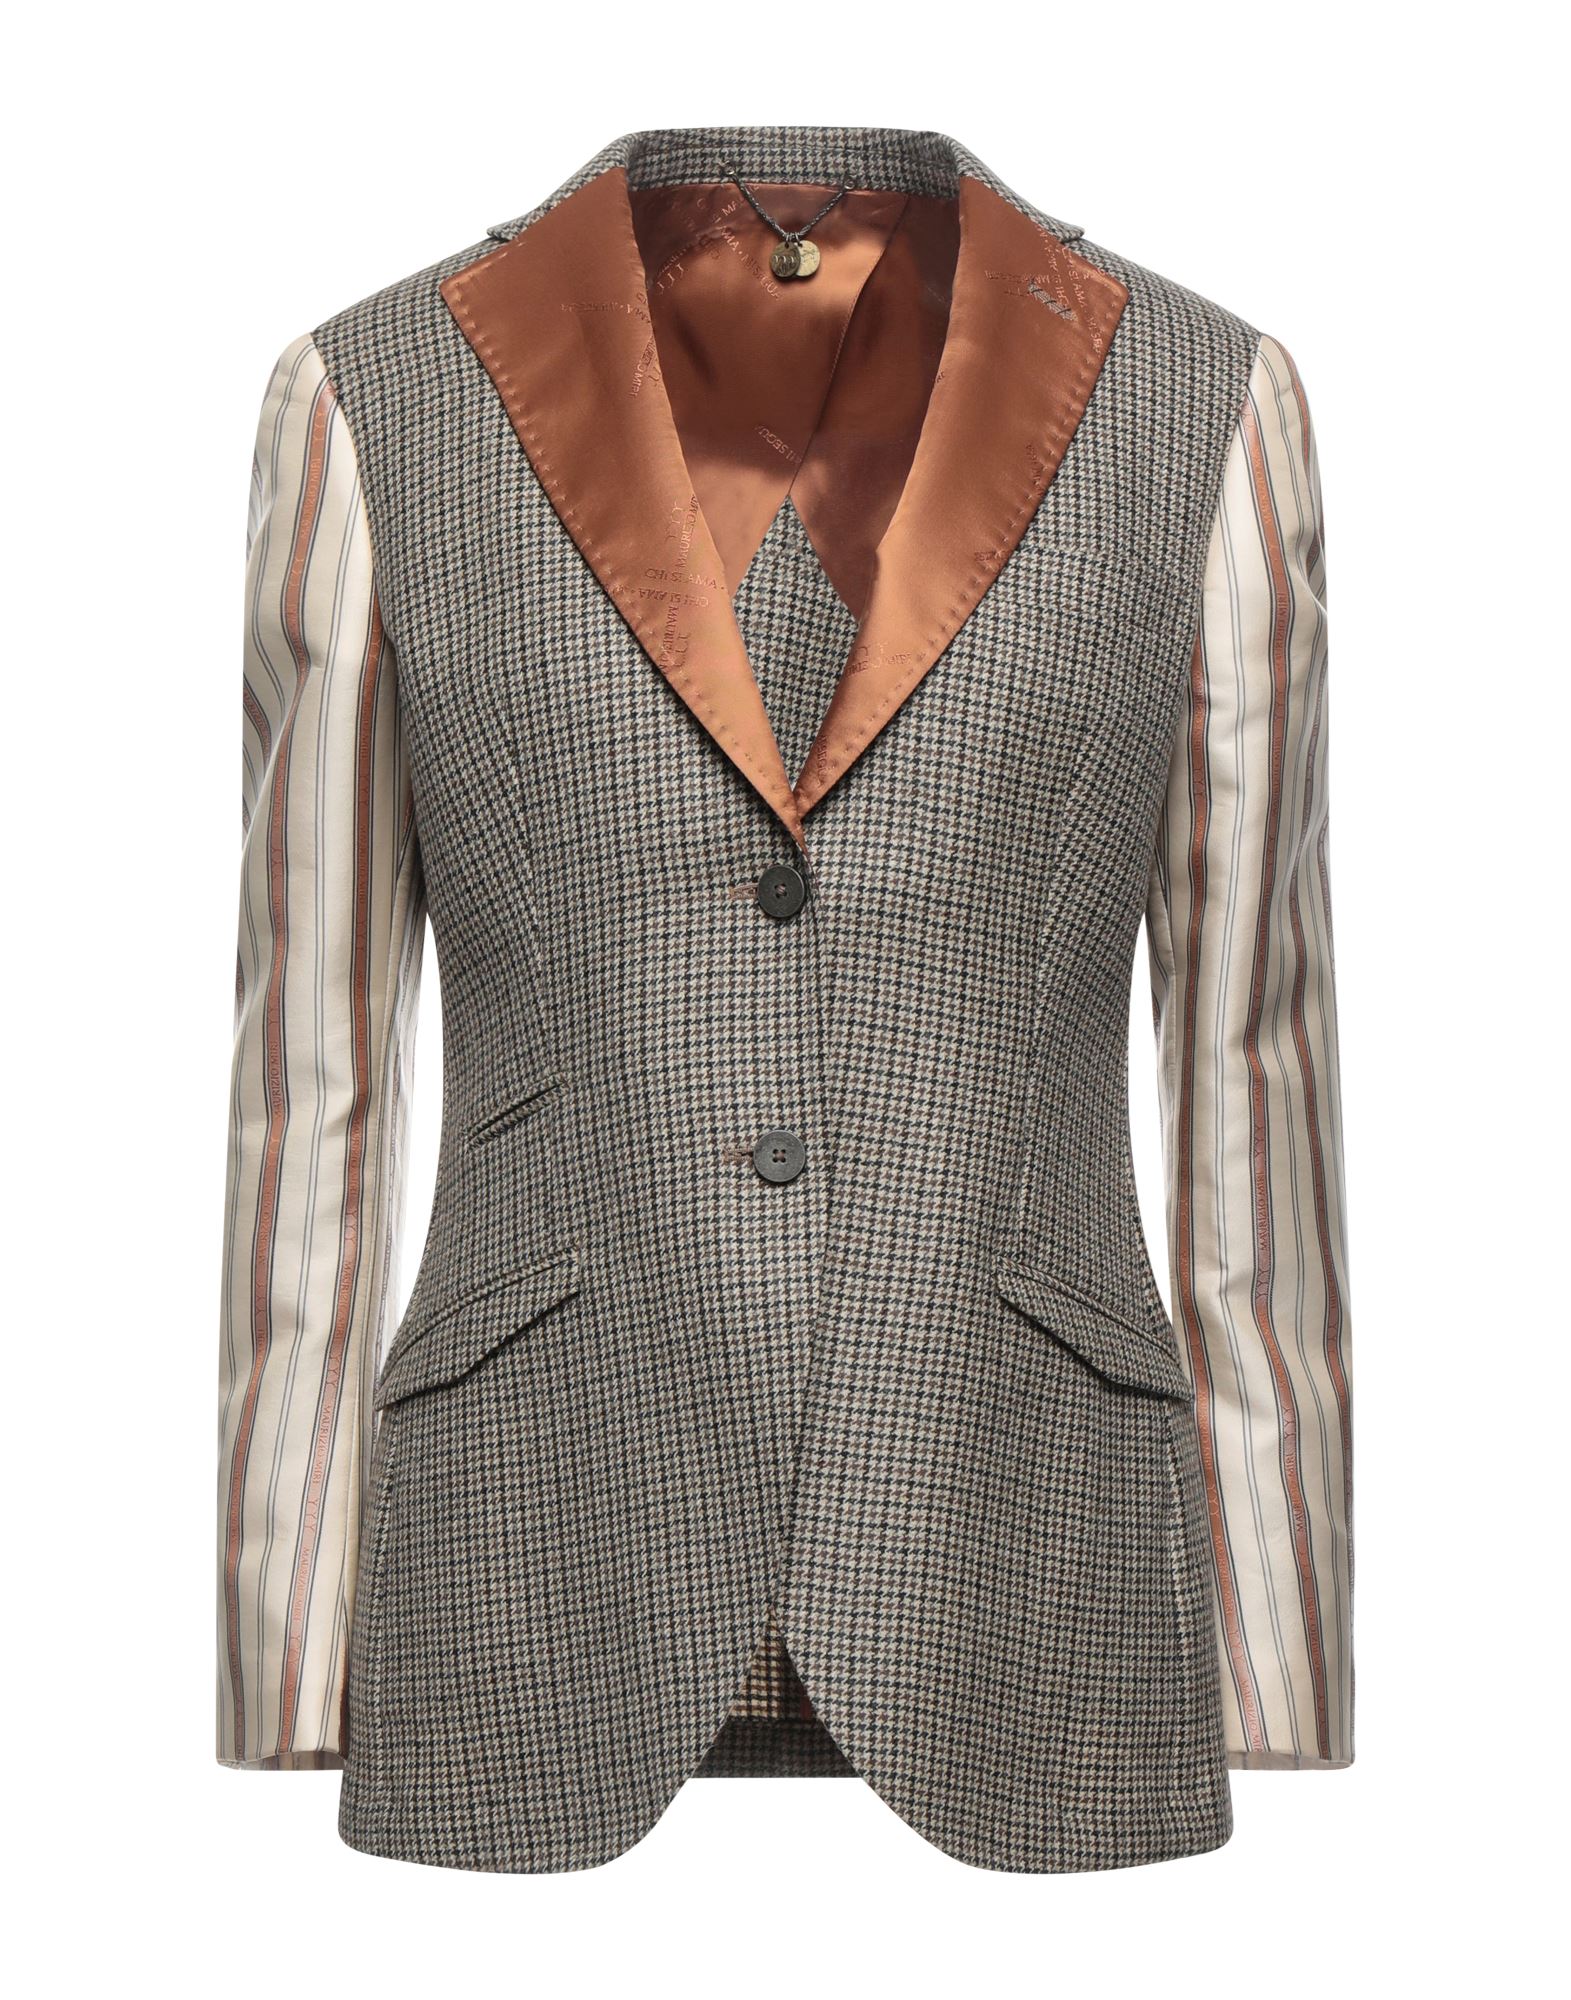 Maurizio Miri Suit Jackets In Sand